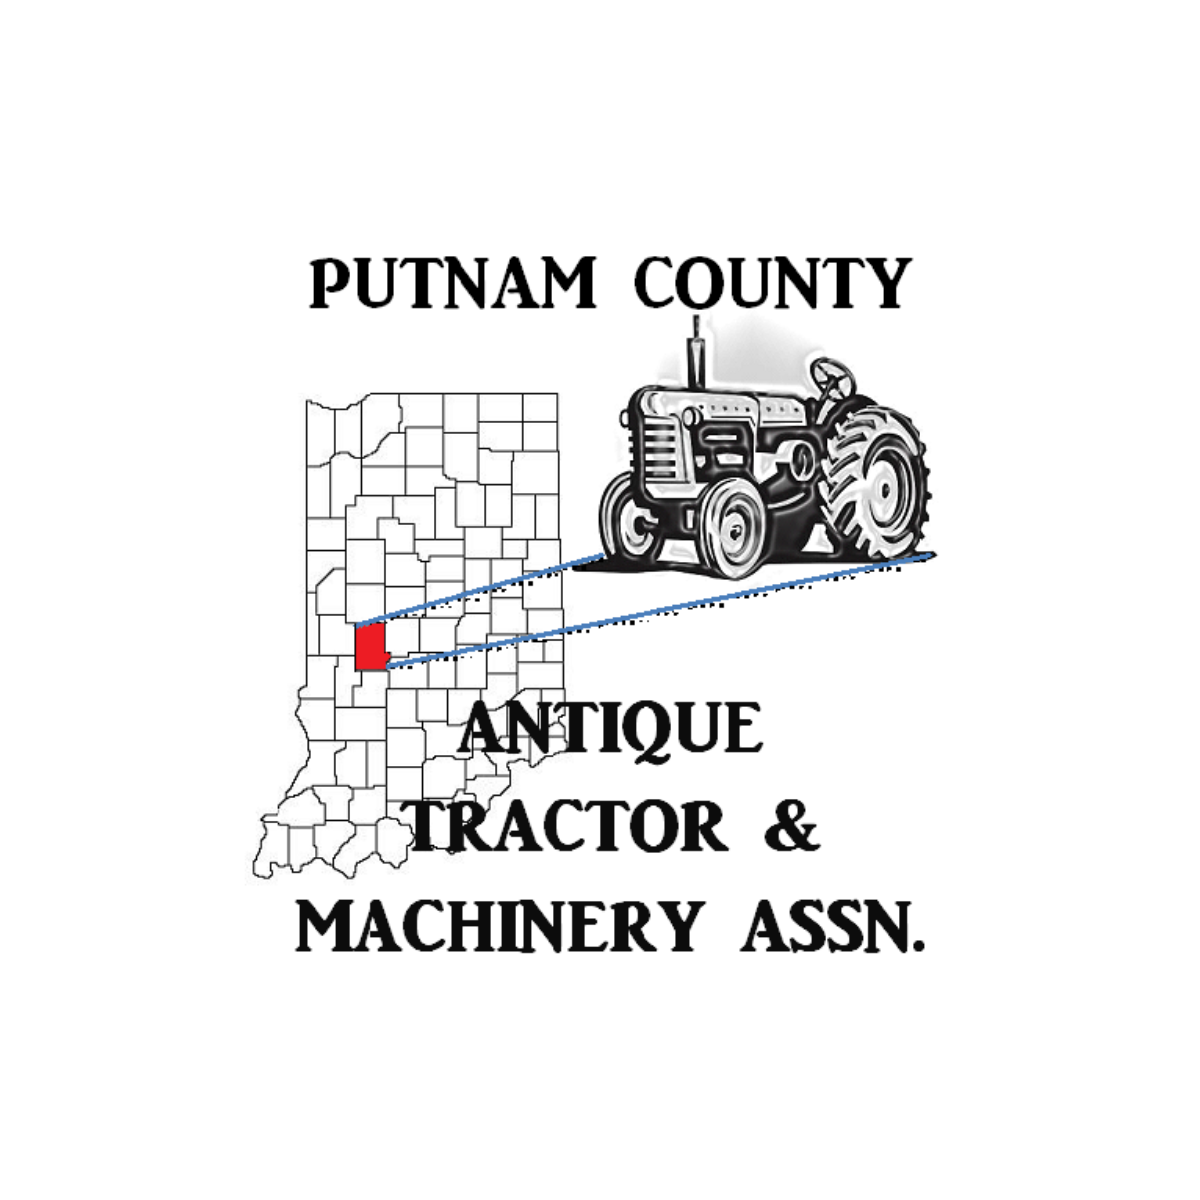 a picture of indiana with all of the counties outlined. there is a tractor to the right with lines going to putnam county on the map, which is colored in red